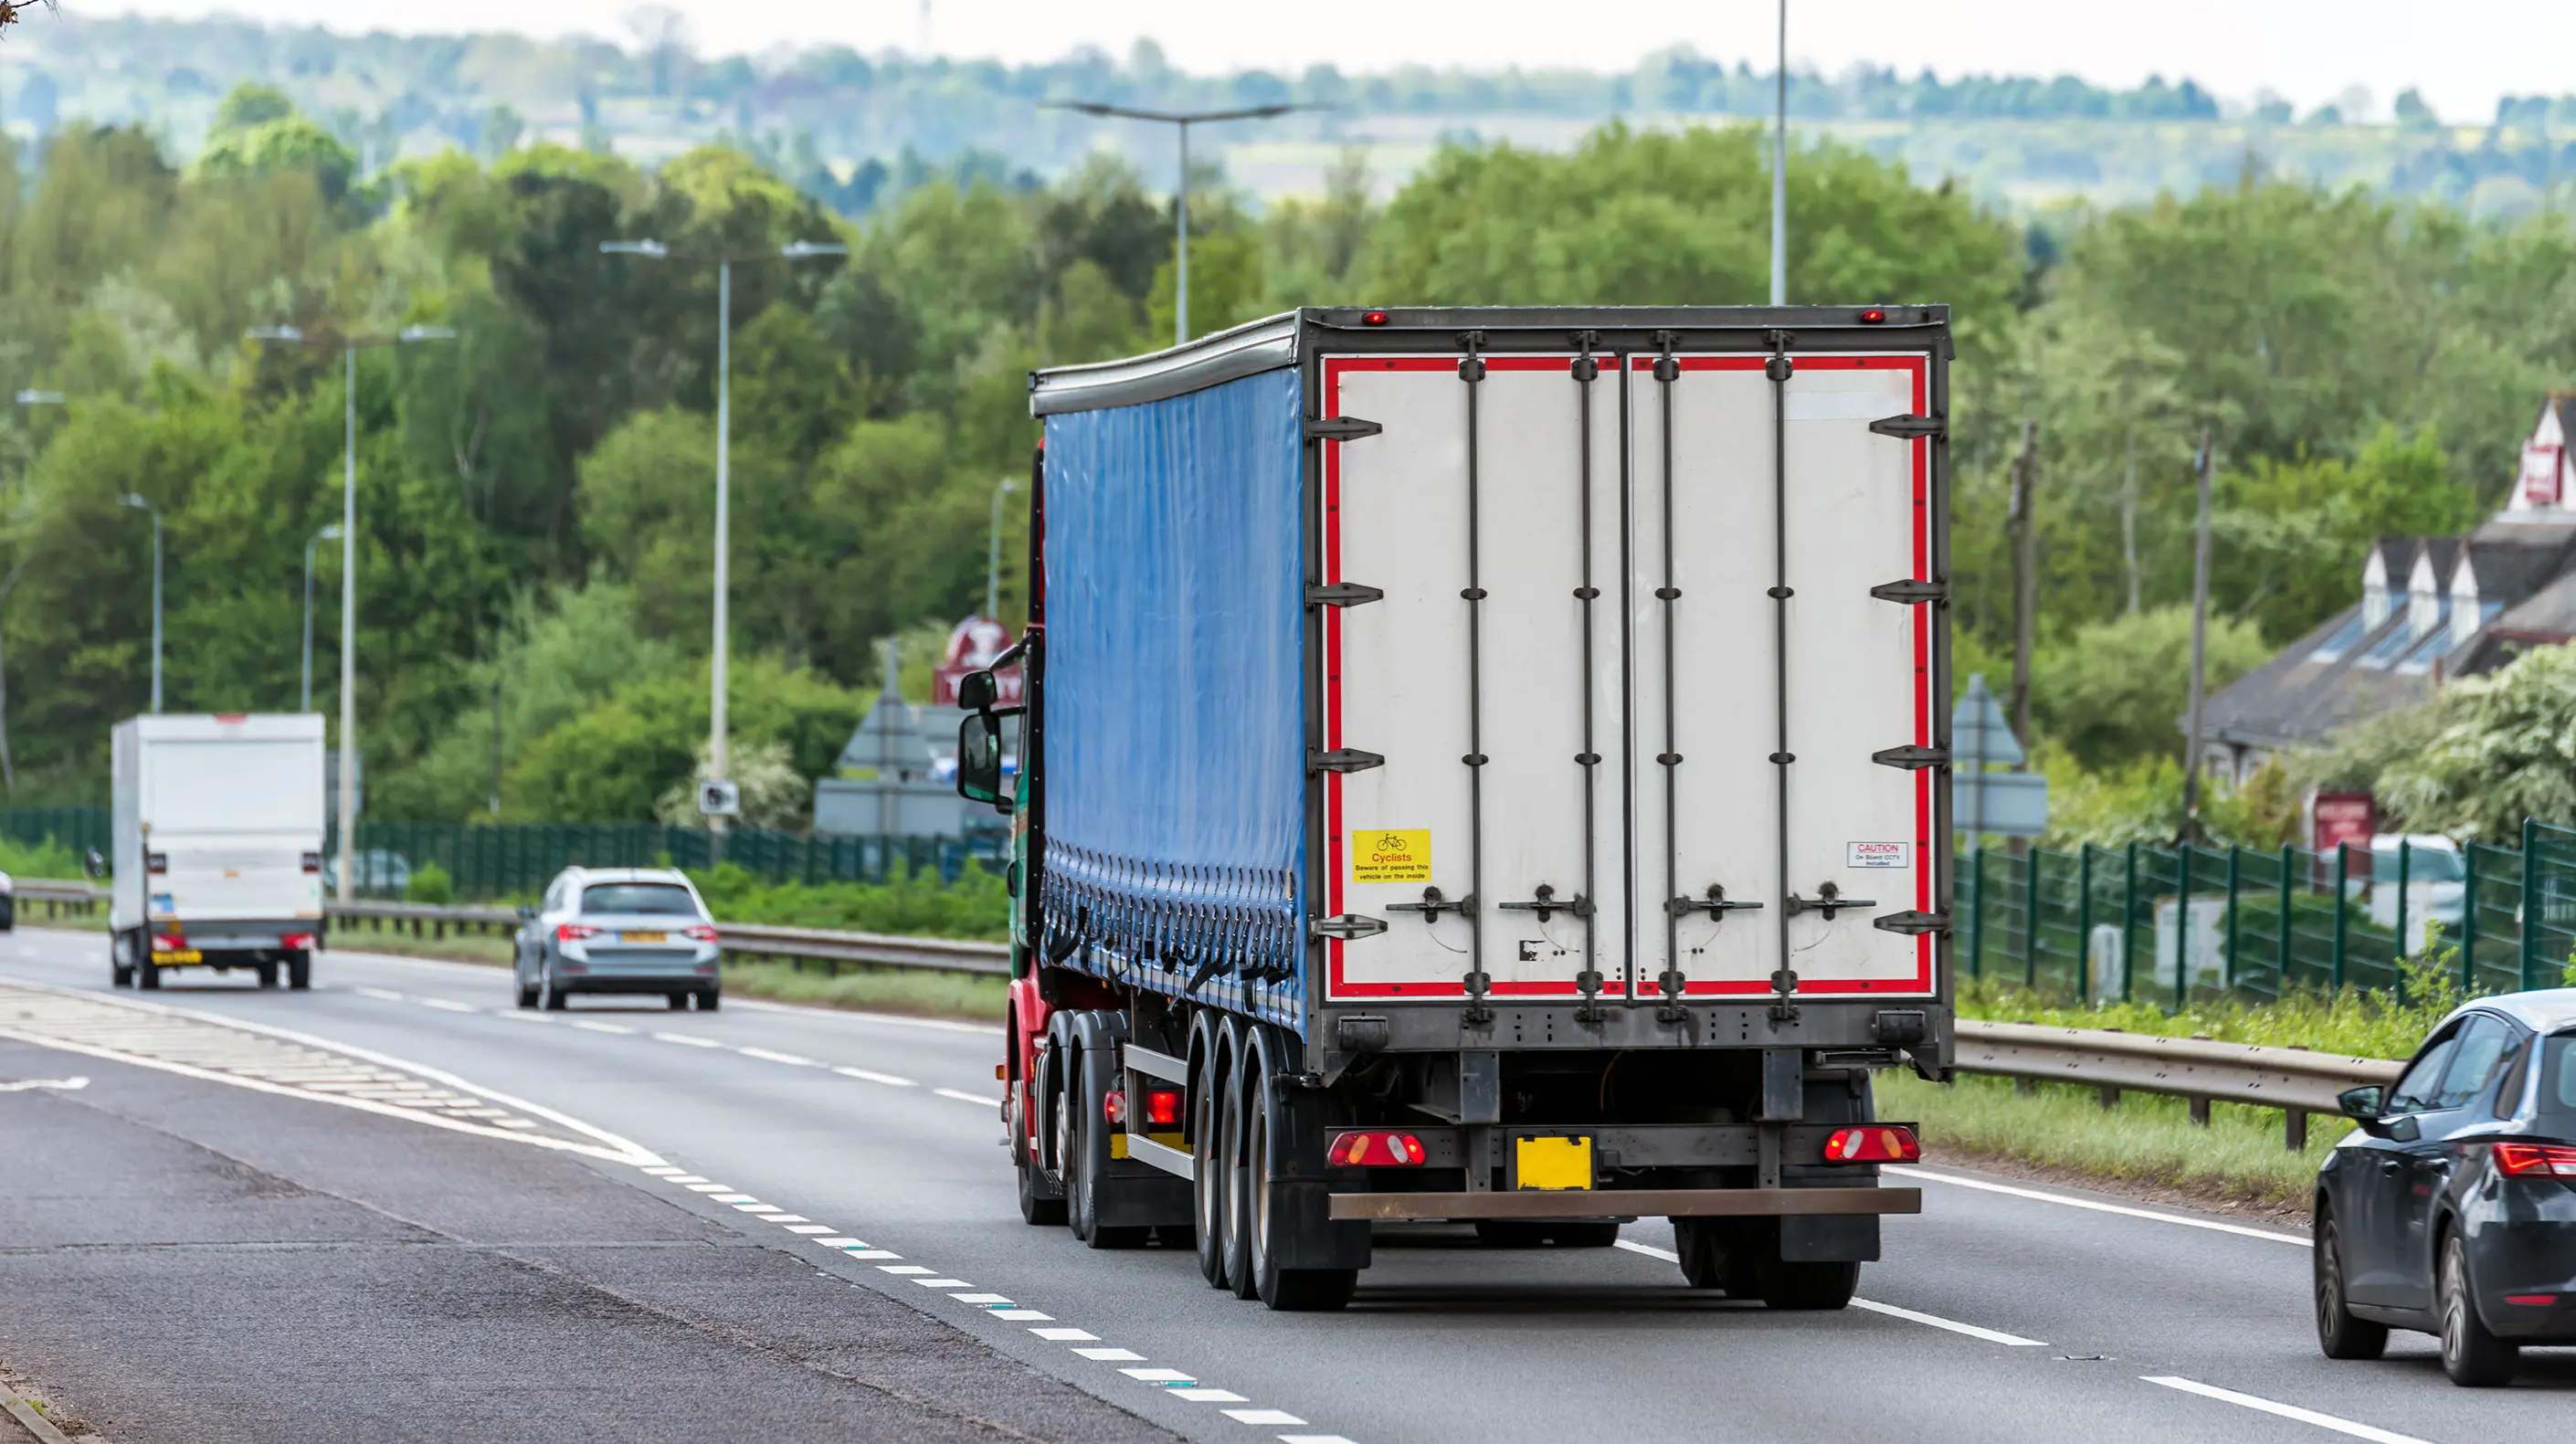 Photograph of the rear of a truck while it's driving down a road.